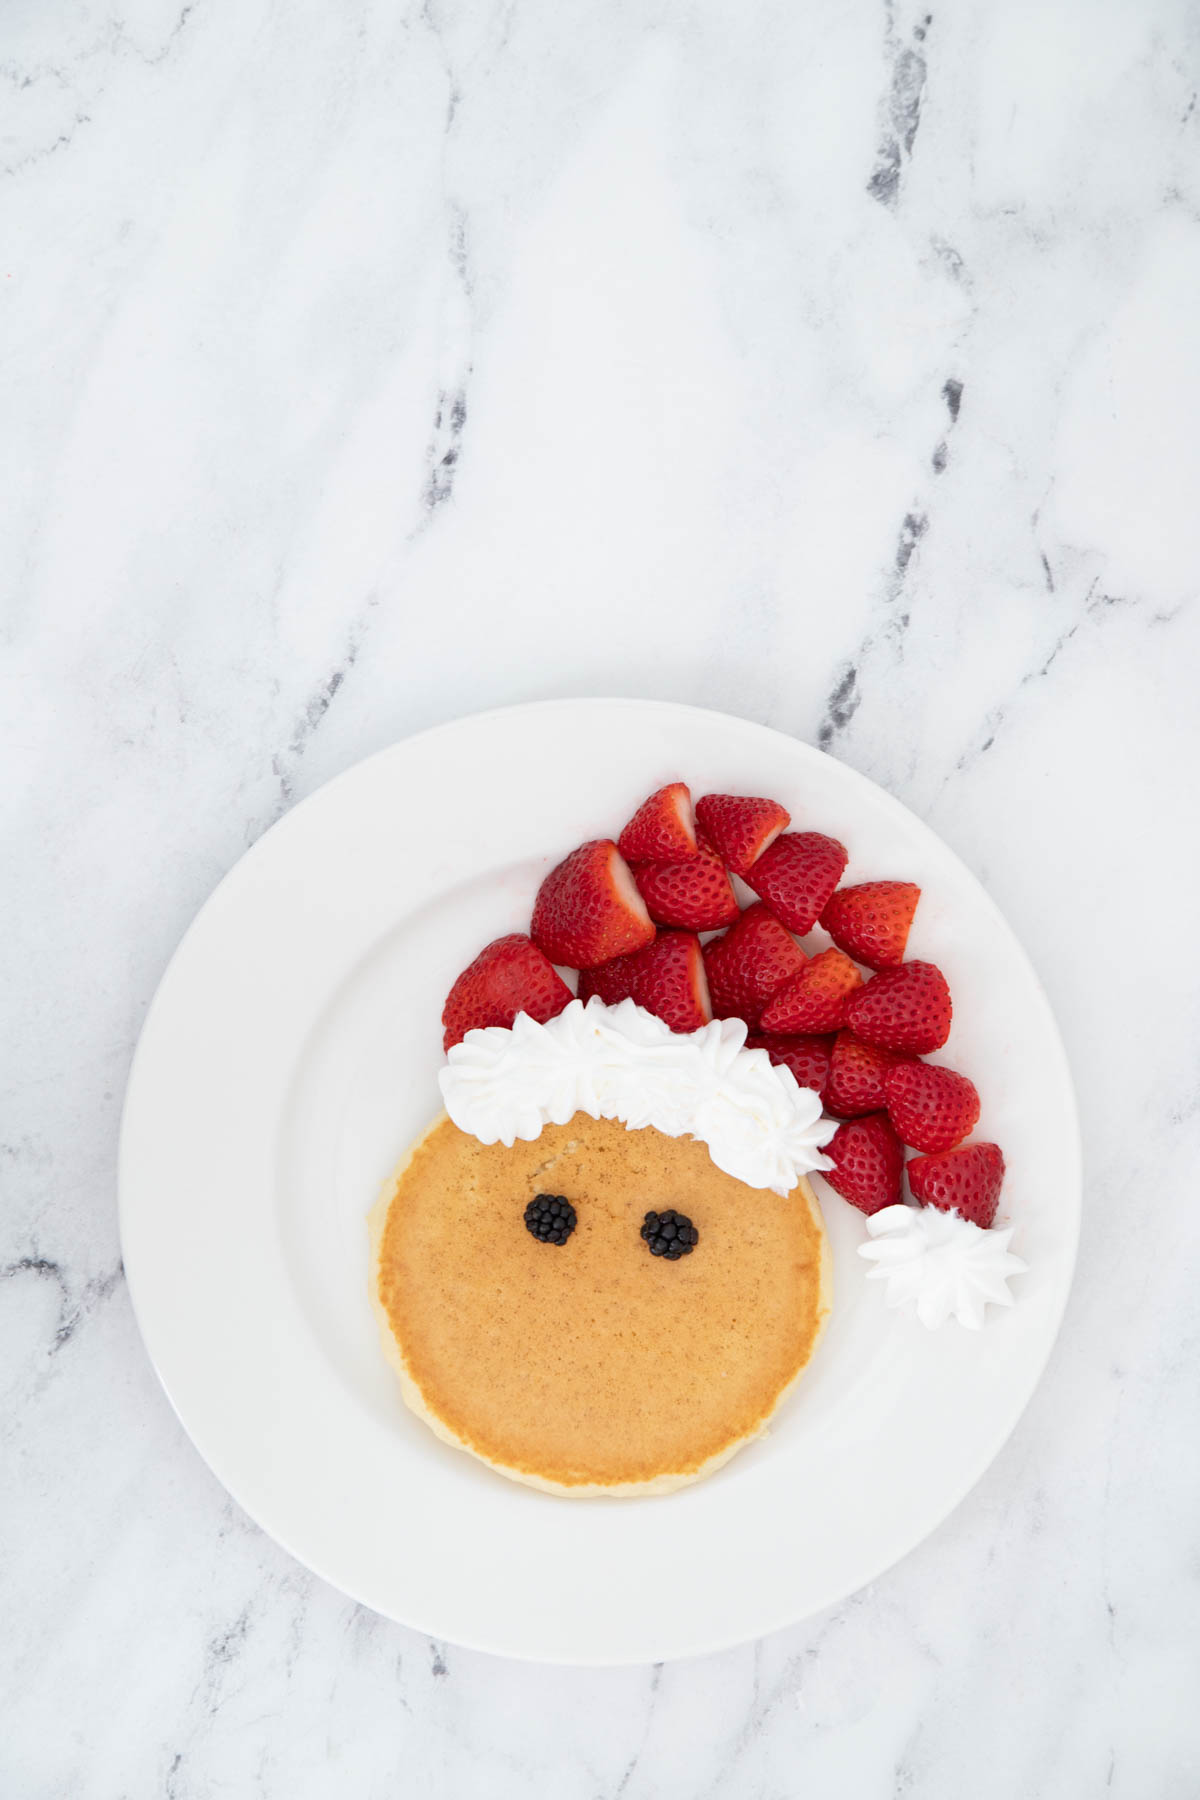 A plate of pancakes with strawberries and a santa hat on it.